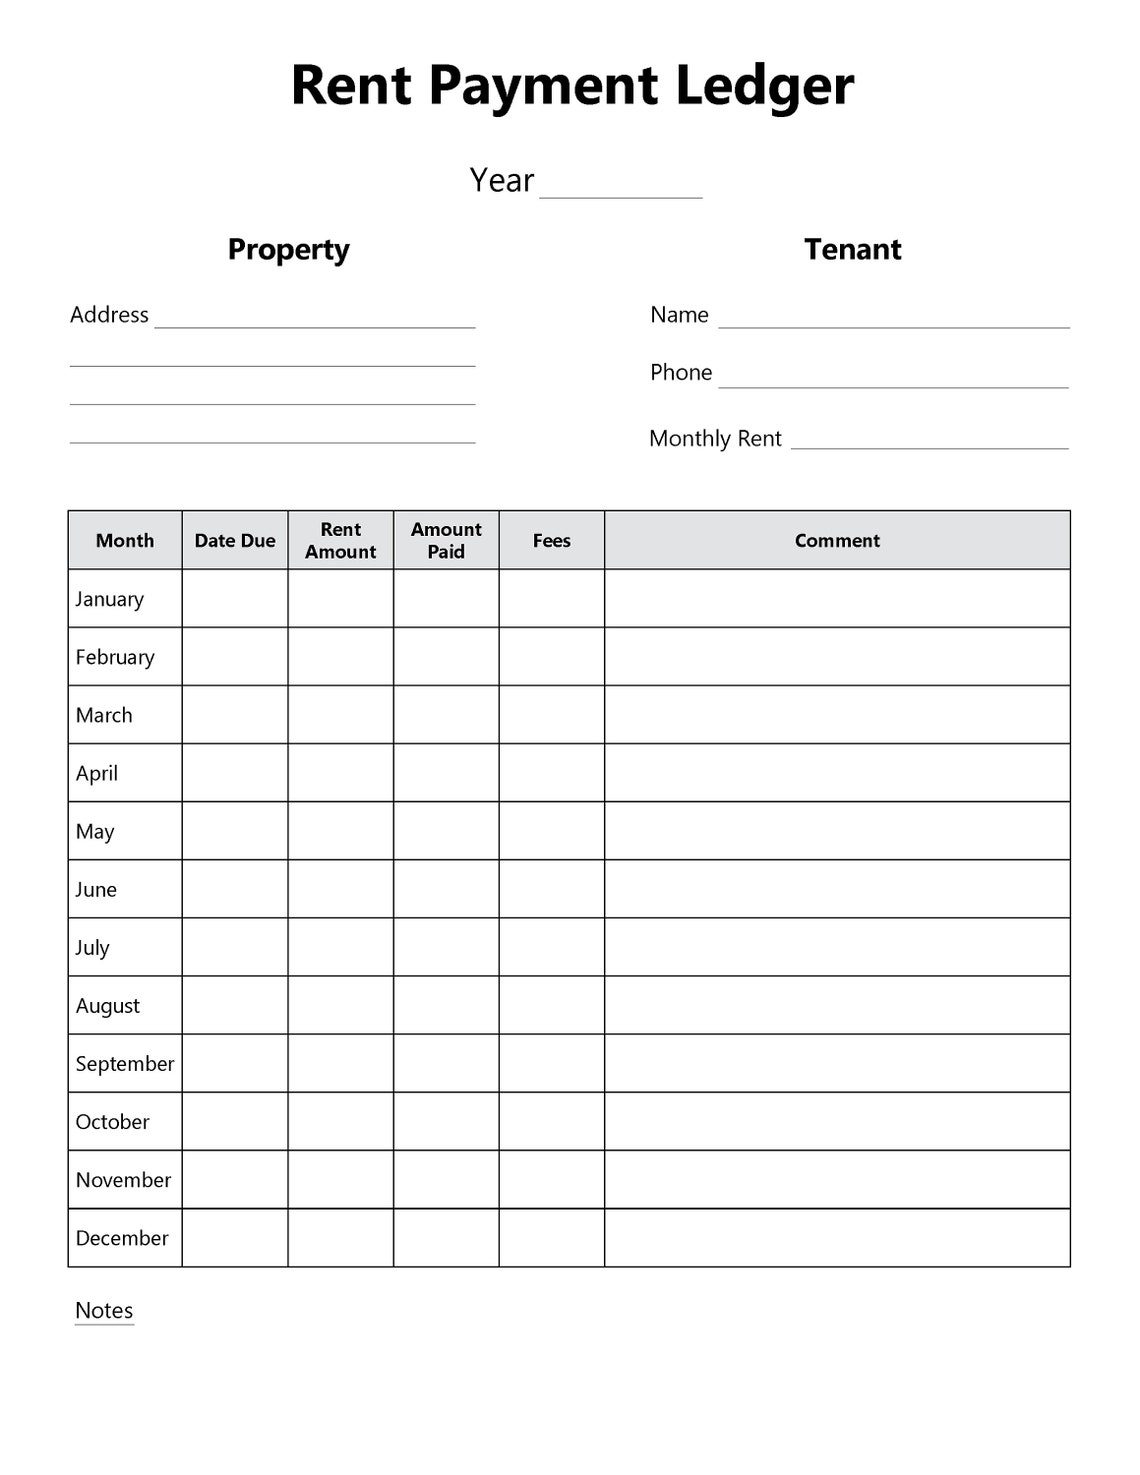 Rent Ledger Fillable And Printable Rent Payment Tracker Etsy